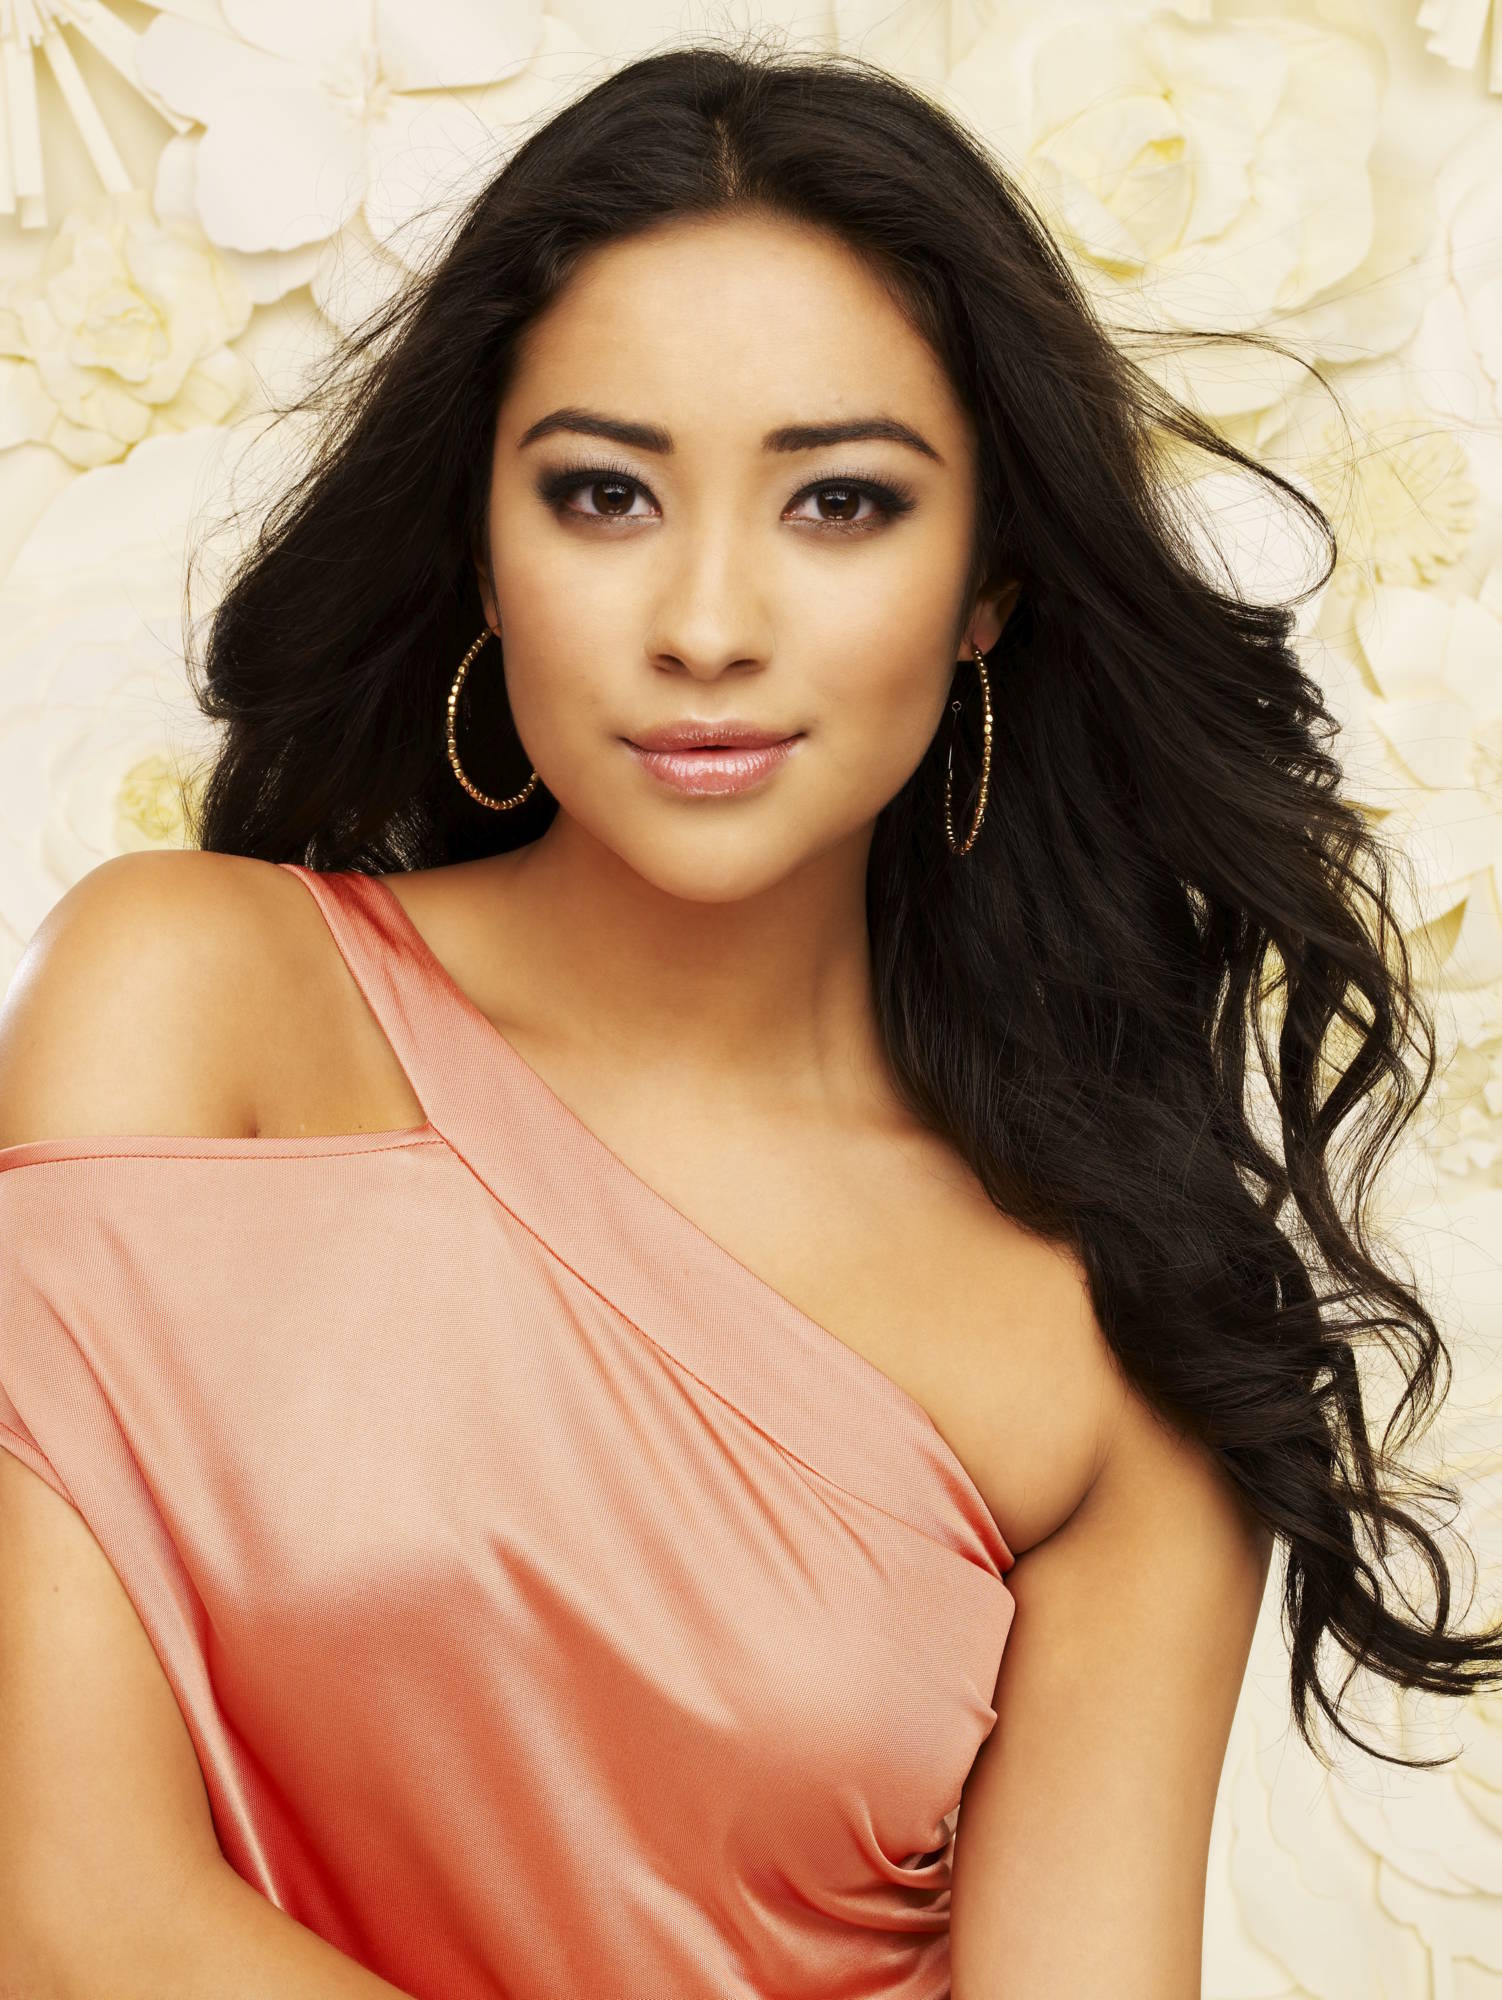 Picture Of Shay Mitchell In Pretty Little Liars Season 1 Shay Mitchell 1337814763 Teen